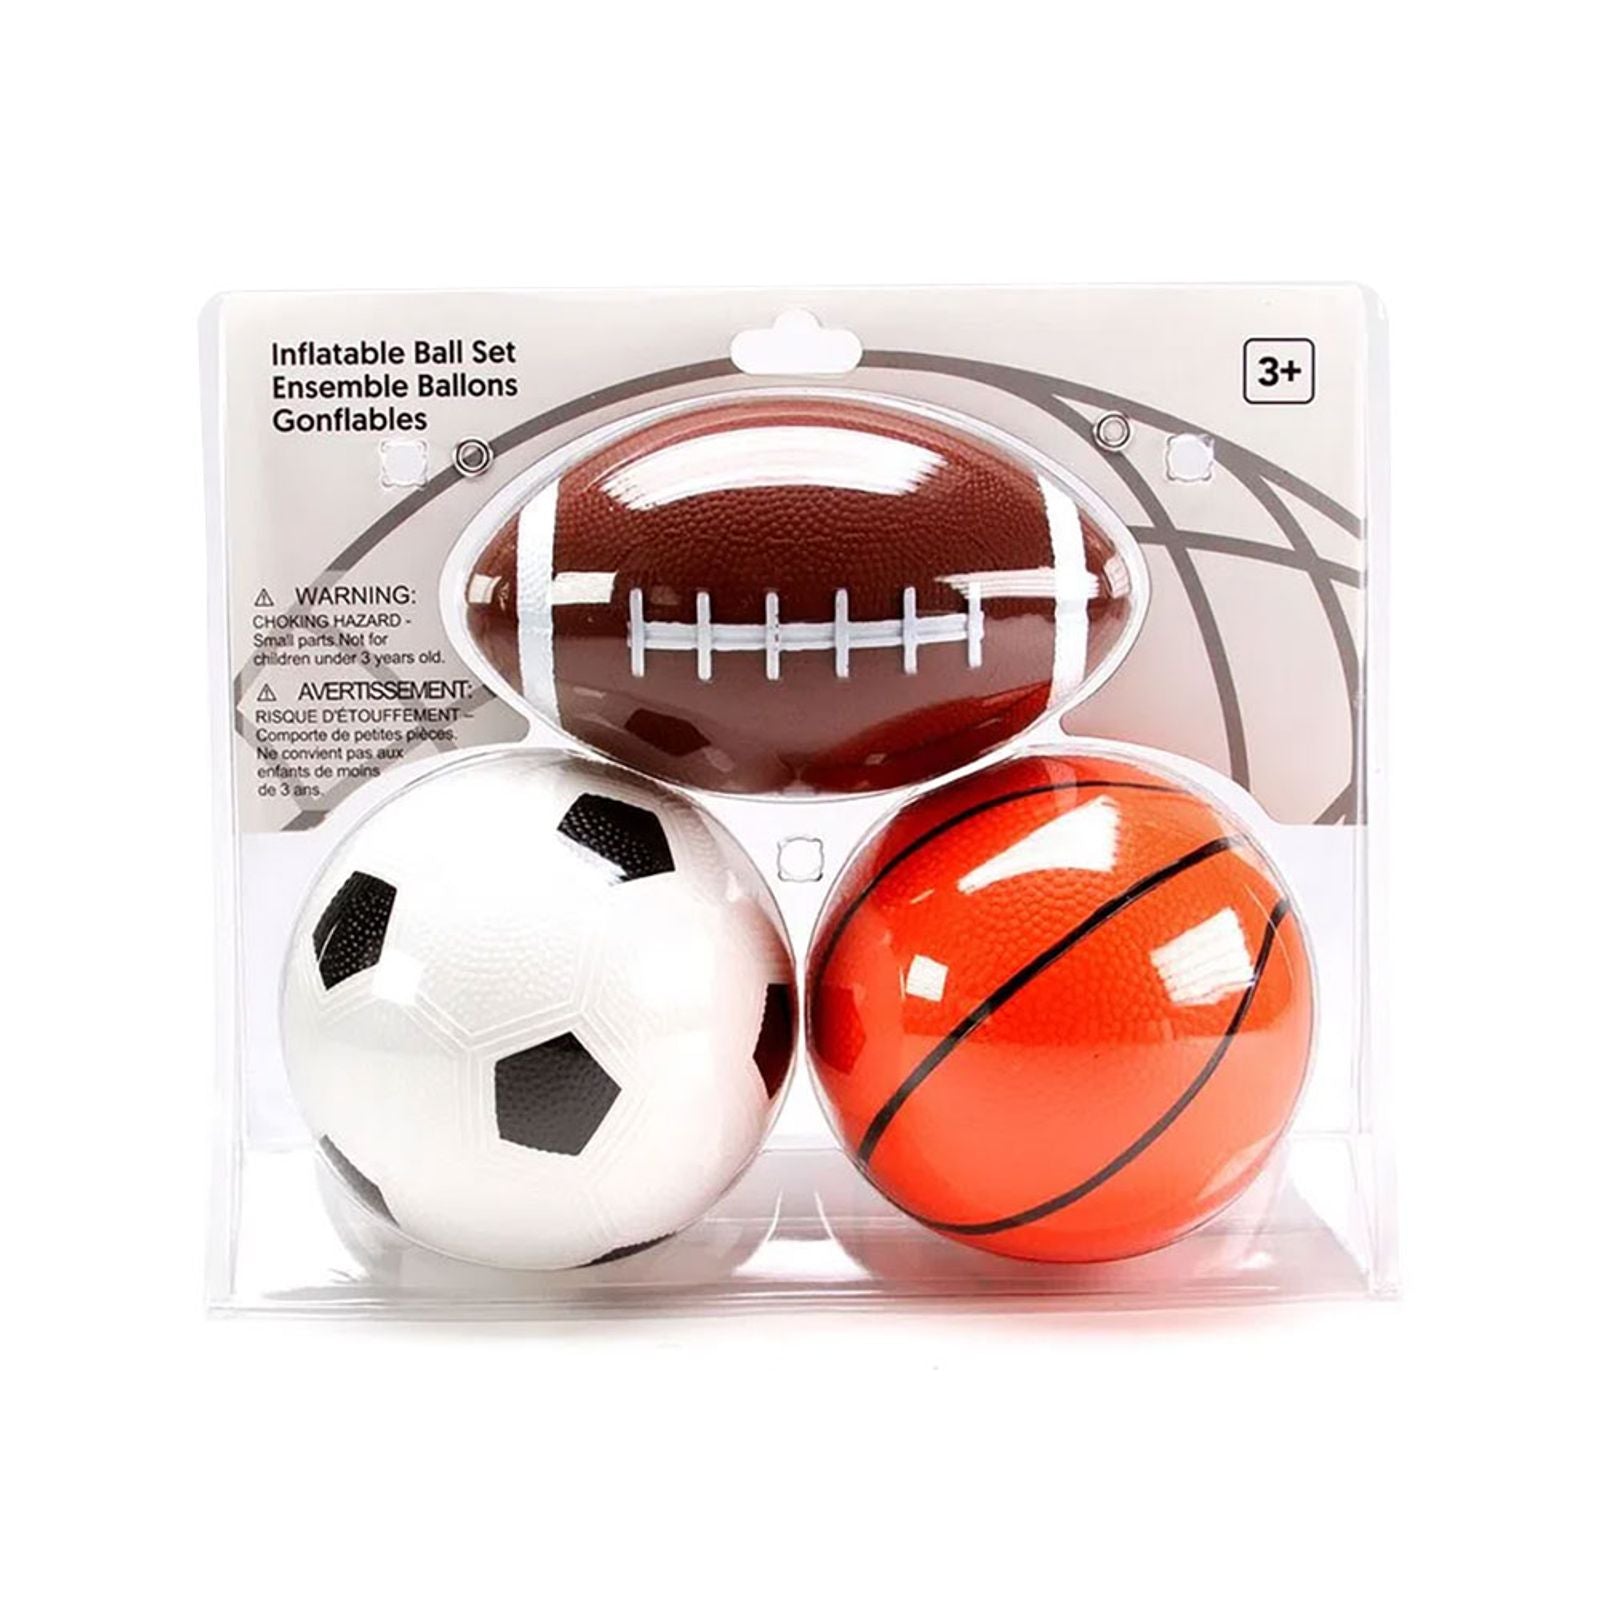 MINISO INFLATABLE BALL SET 2007961110104 SPORT TOYS